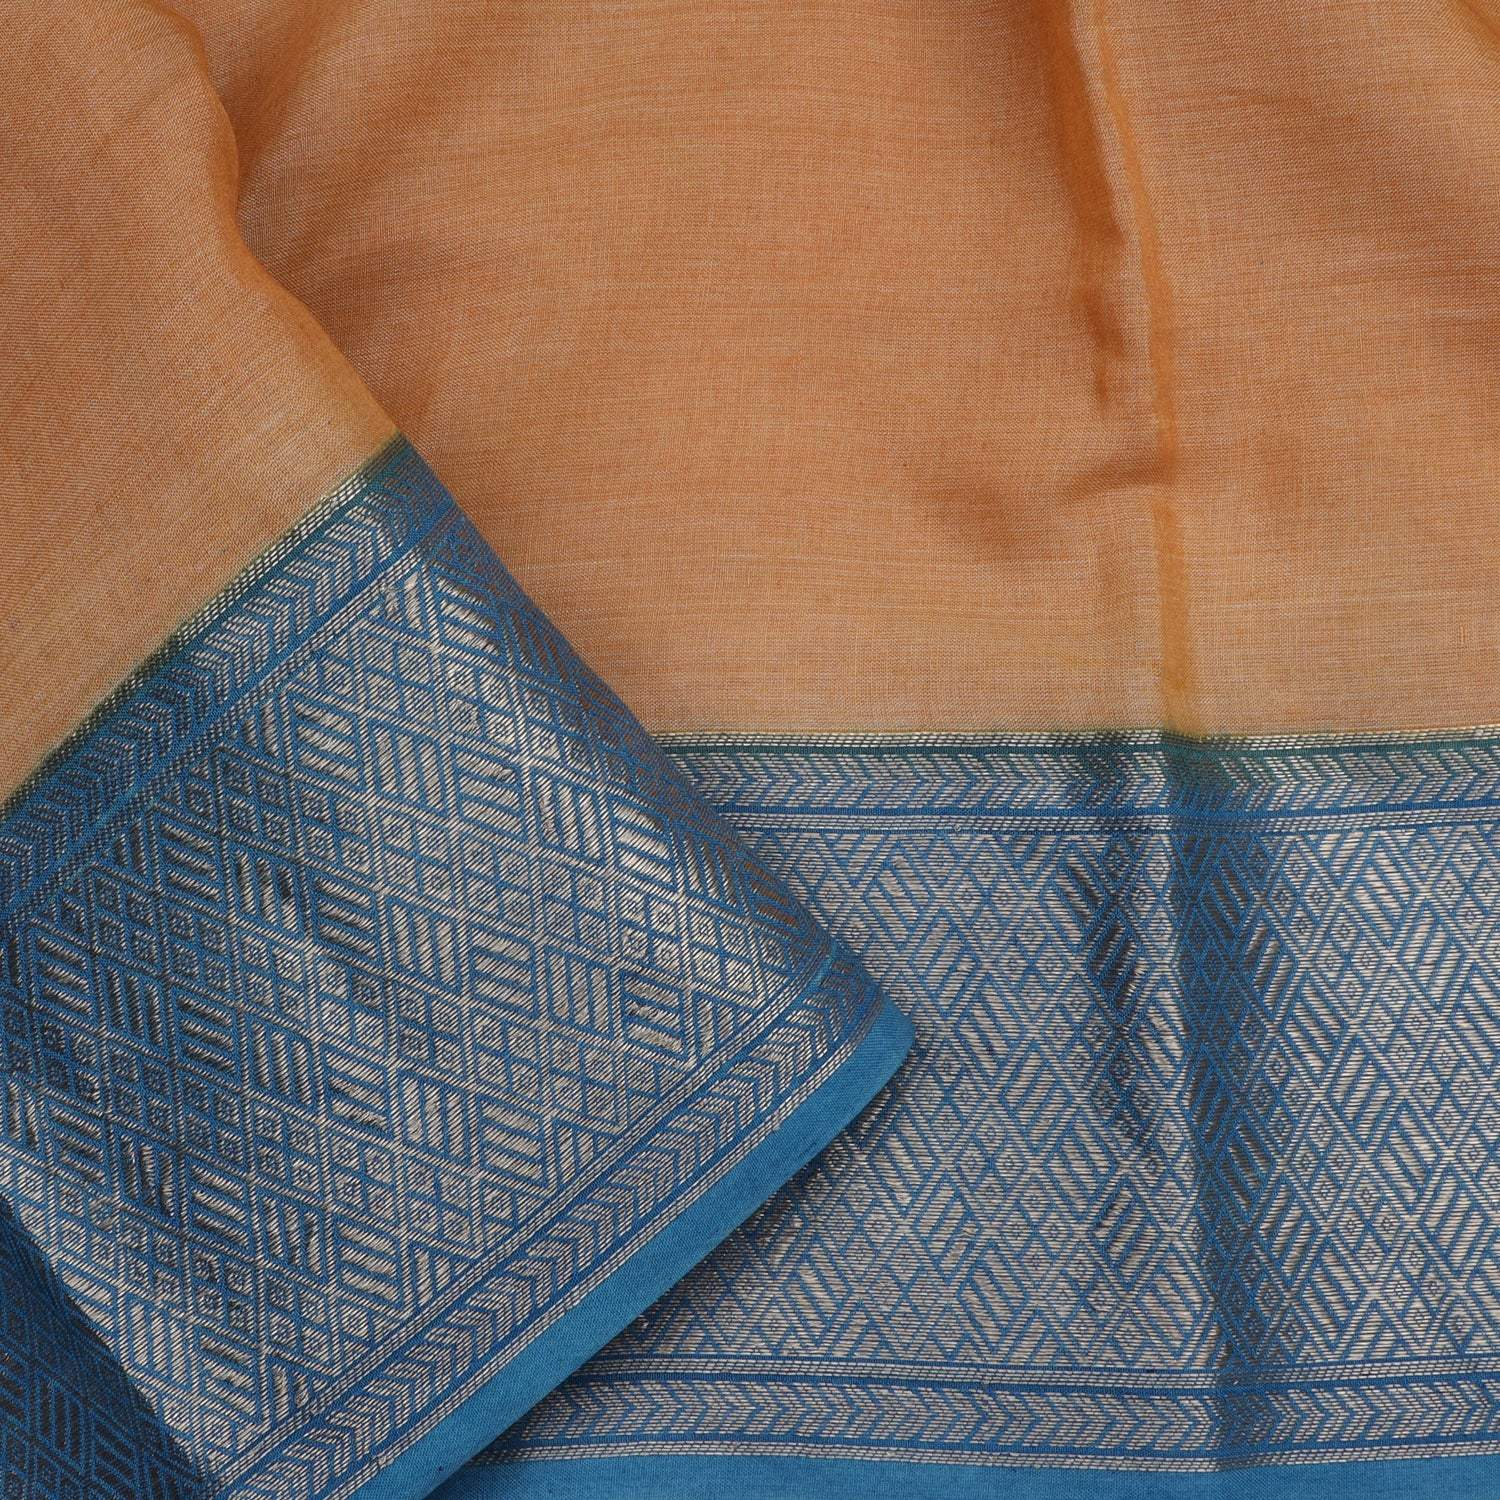 Mustard Yellow Cotton Saree With Floral Printed Motifs - Singhania's